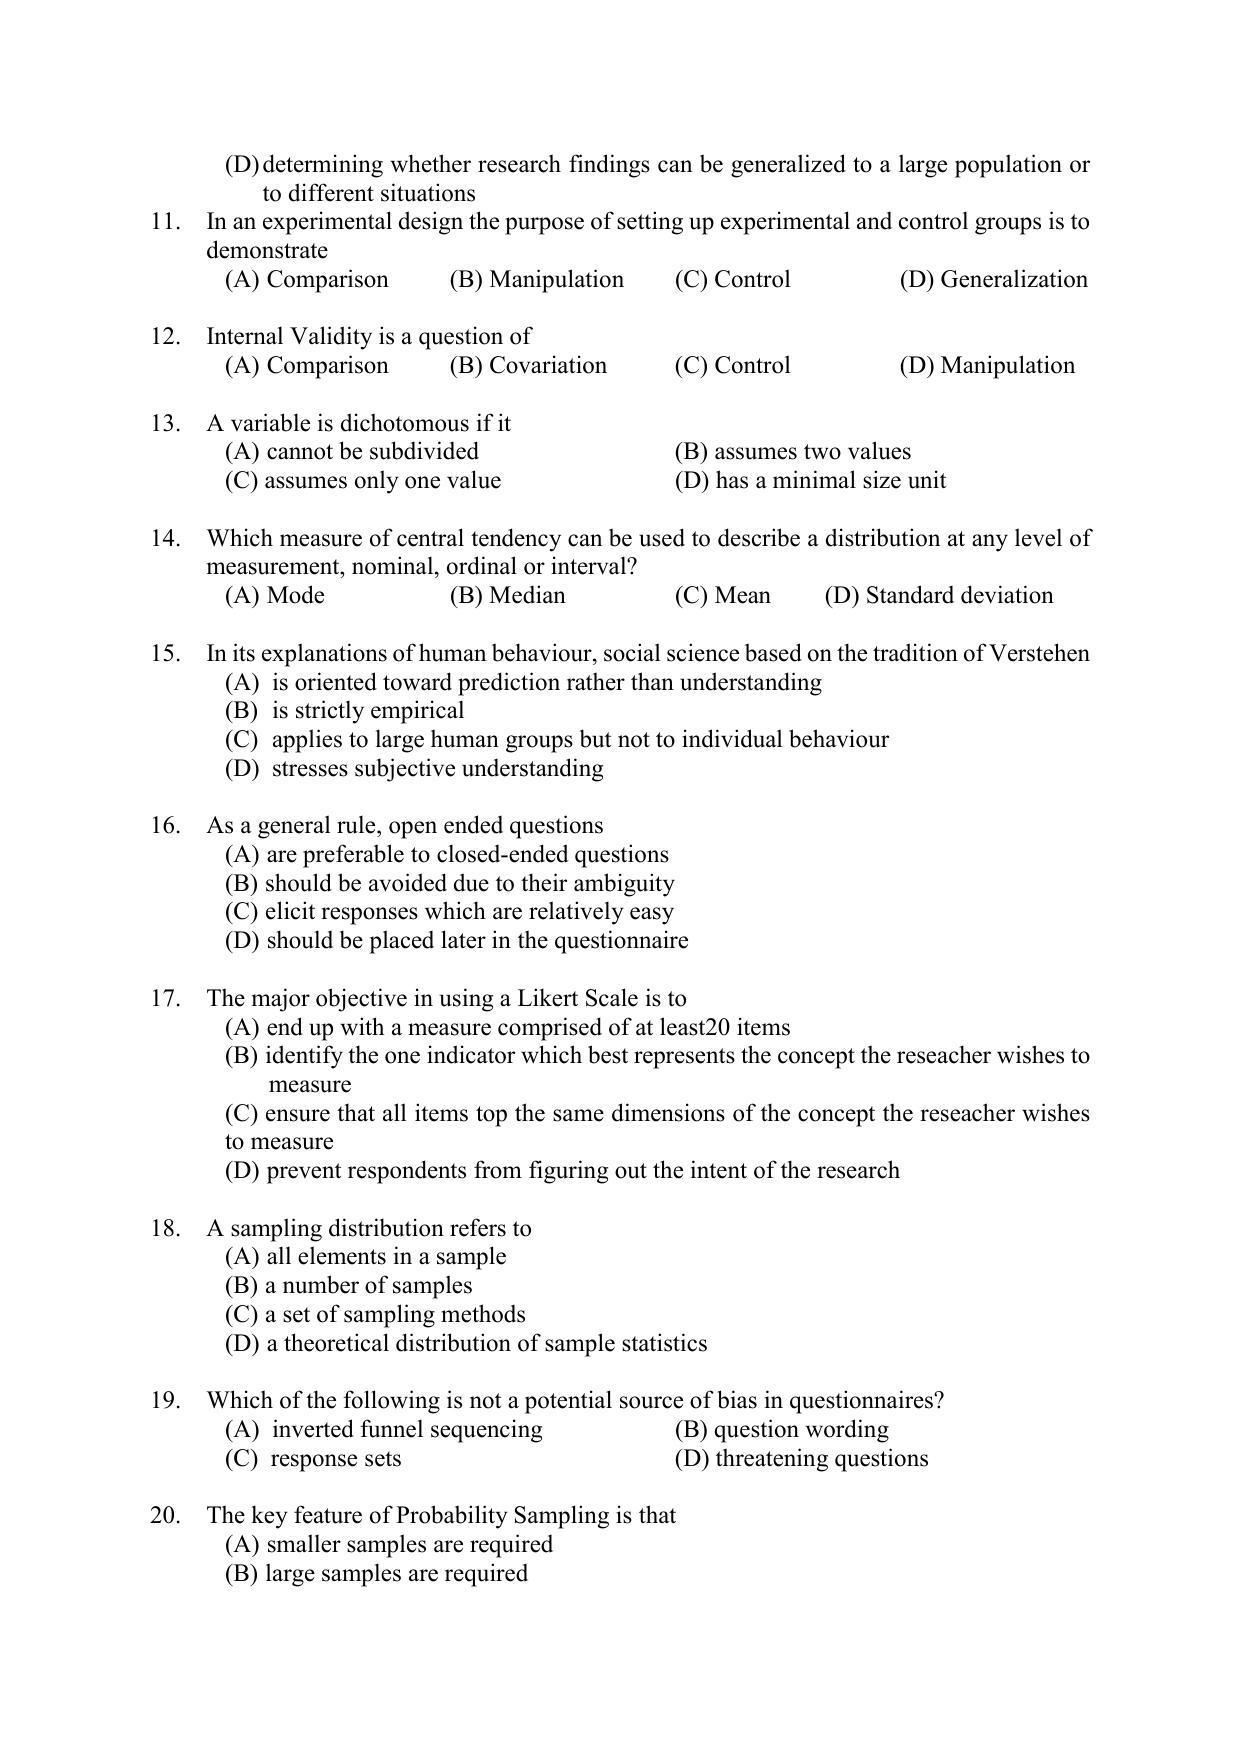 PU MPET Ancient Indian History & Archeology 2022 Question Papers - Page 71